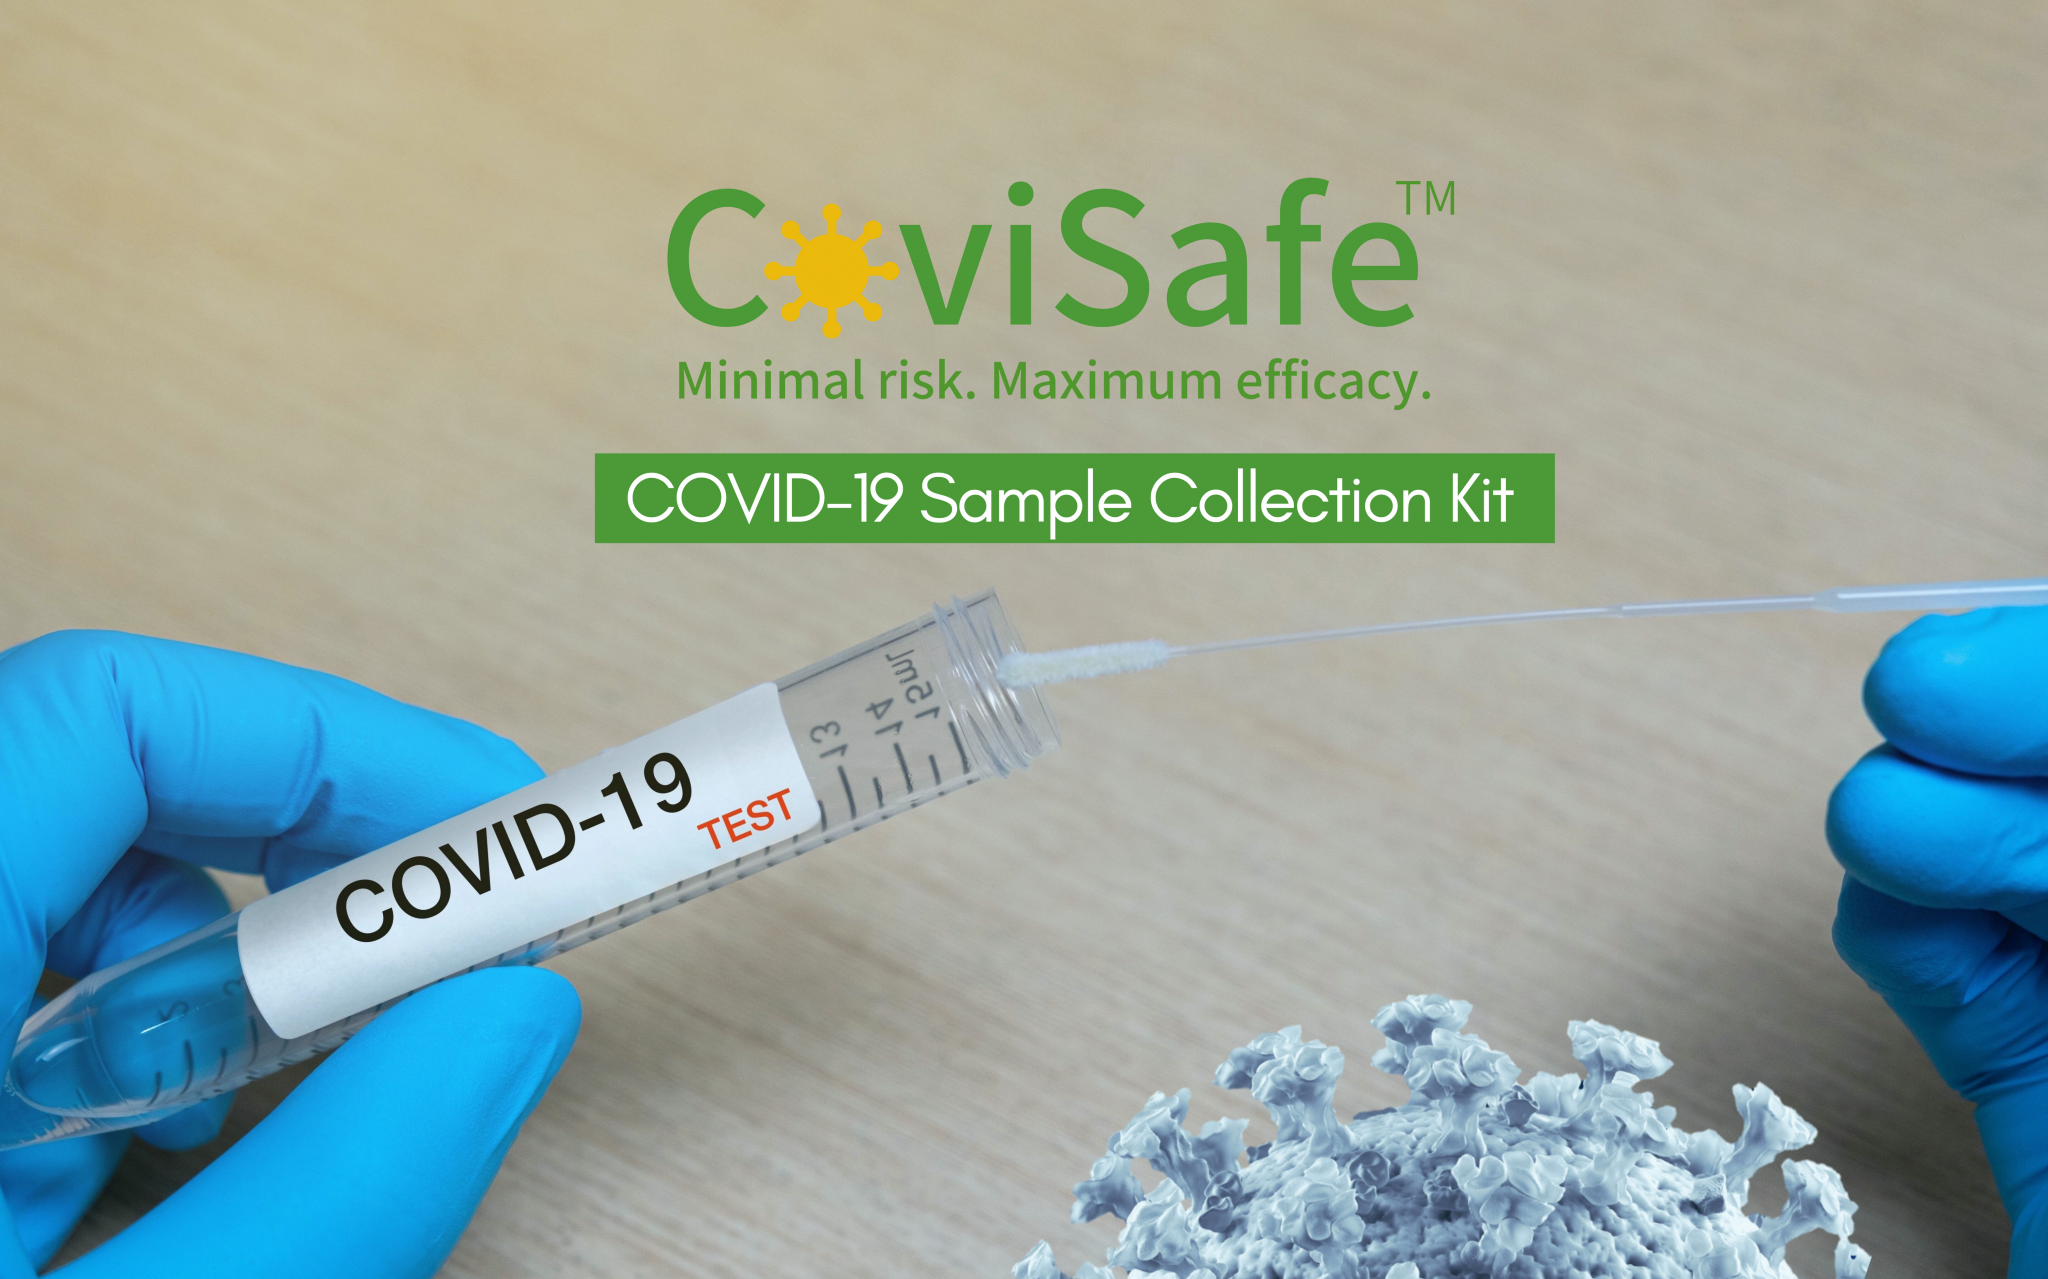 Press Release: Mapmygenome Launches Covisafe – A Superior Viral Sample Collection Kit